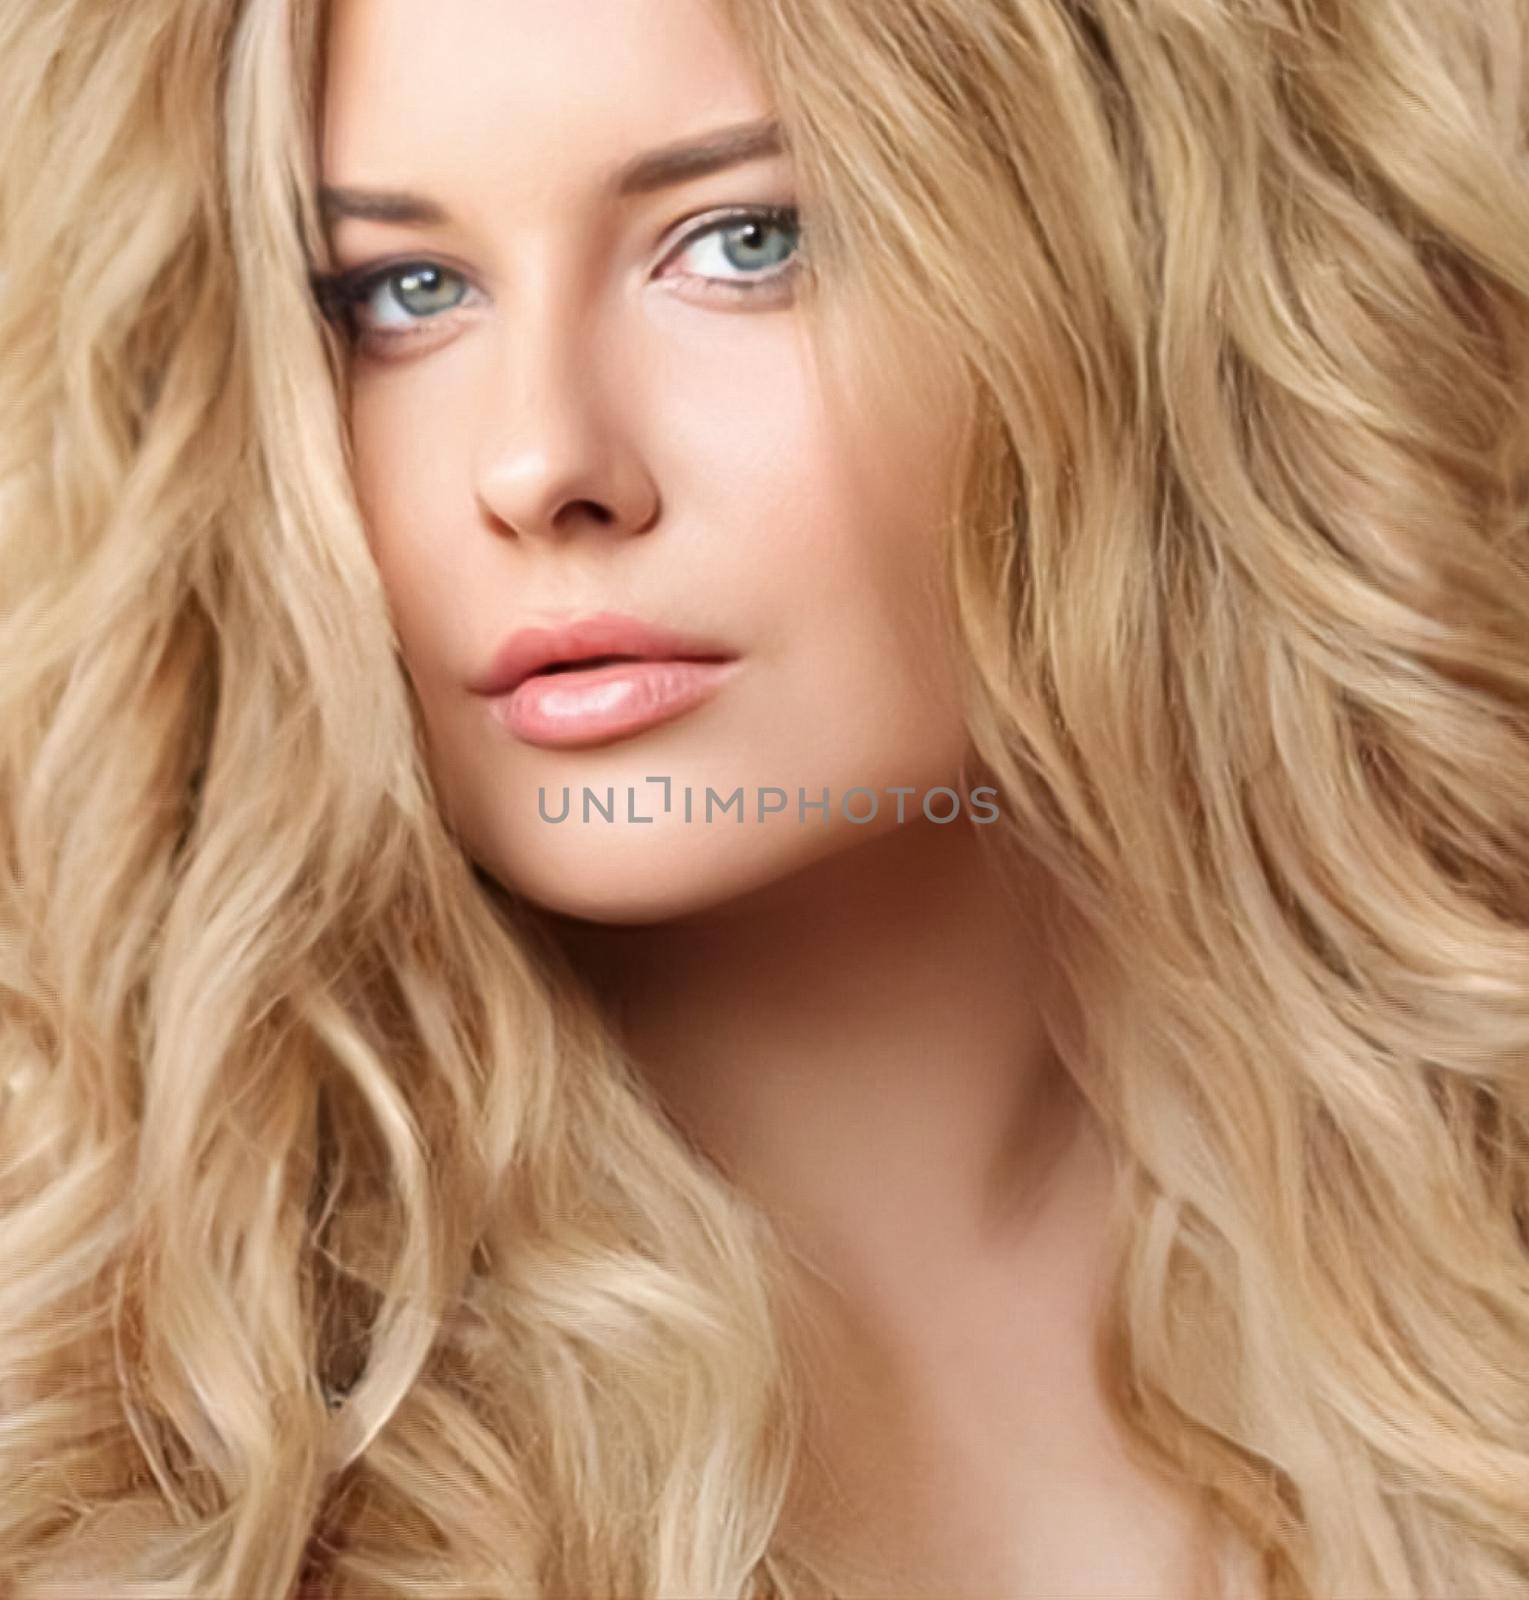 Hairstyle, beauty and hair care, beautiful blonde woman with long blond hair, glamour portrait for hair salon and haircare by Anneleven